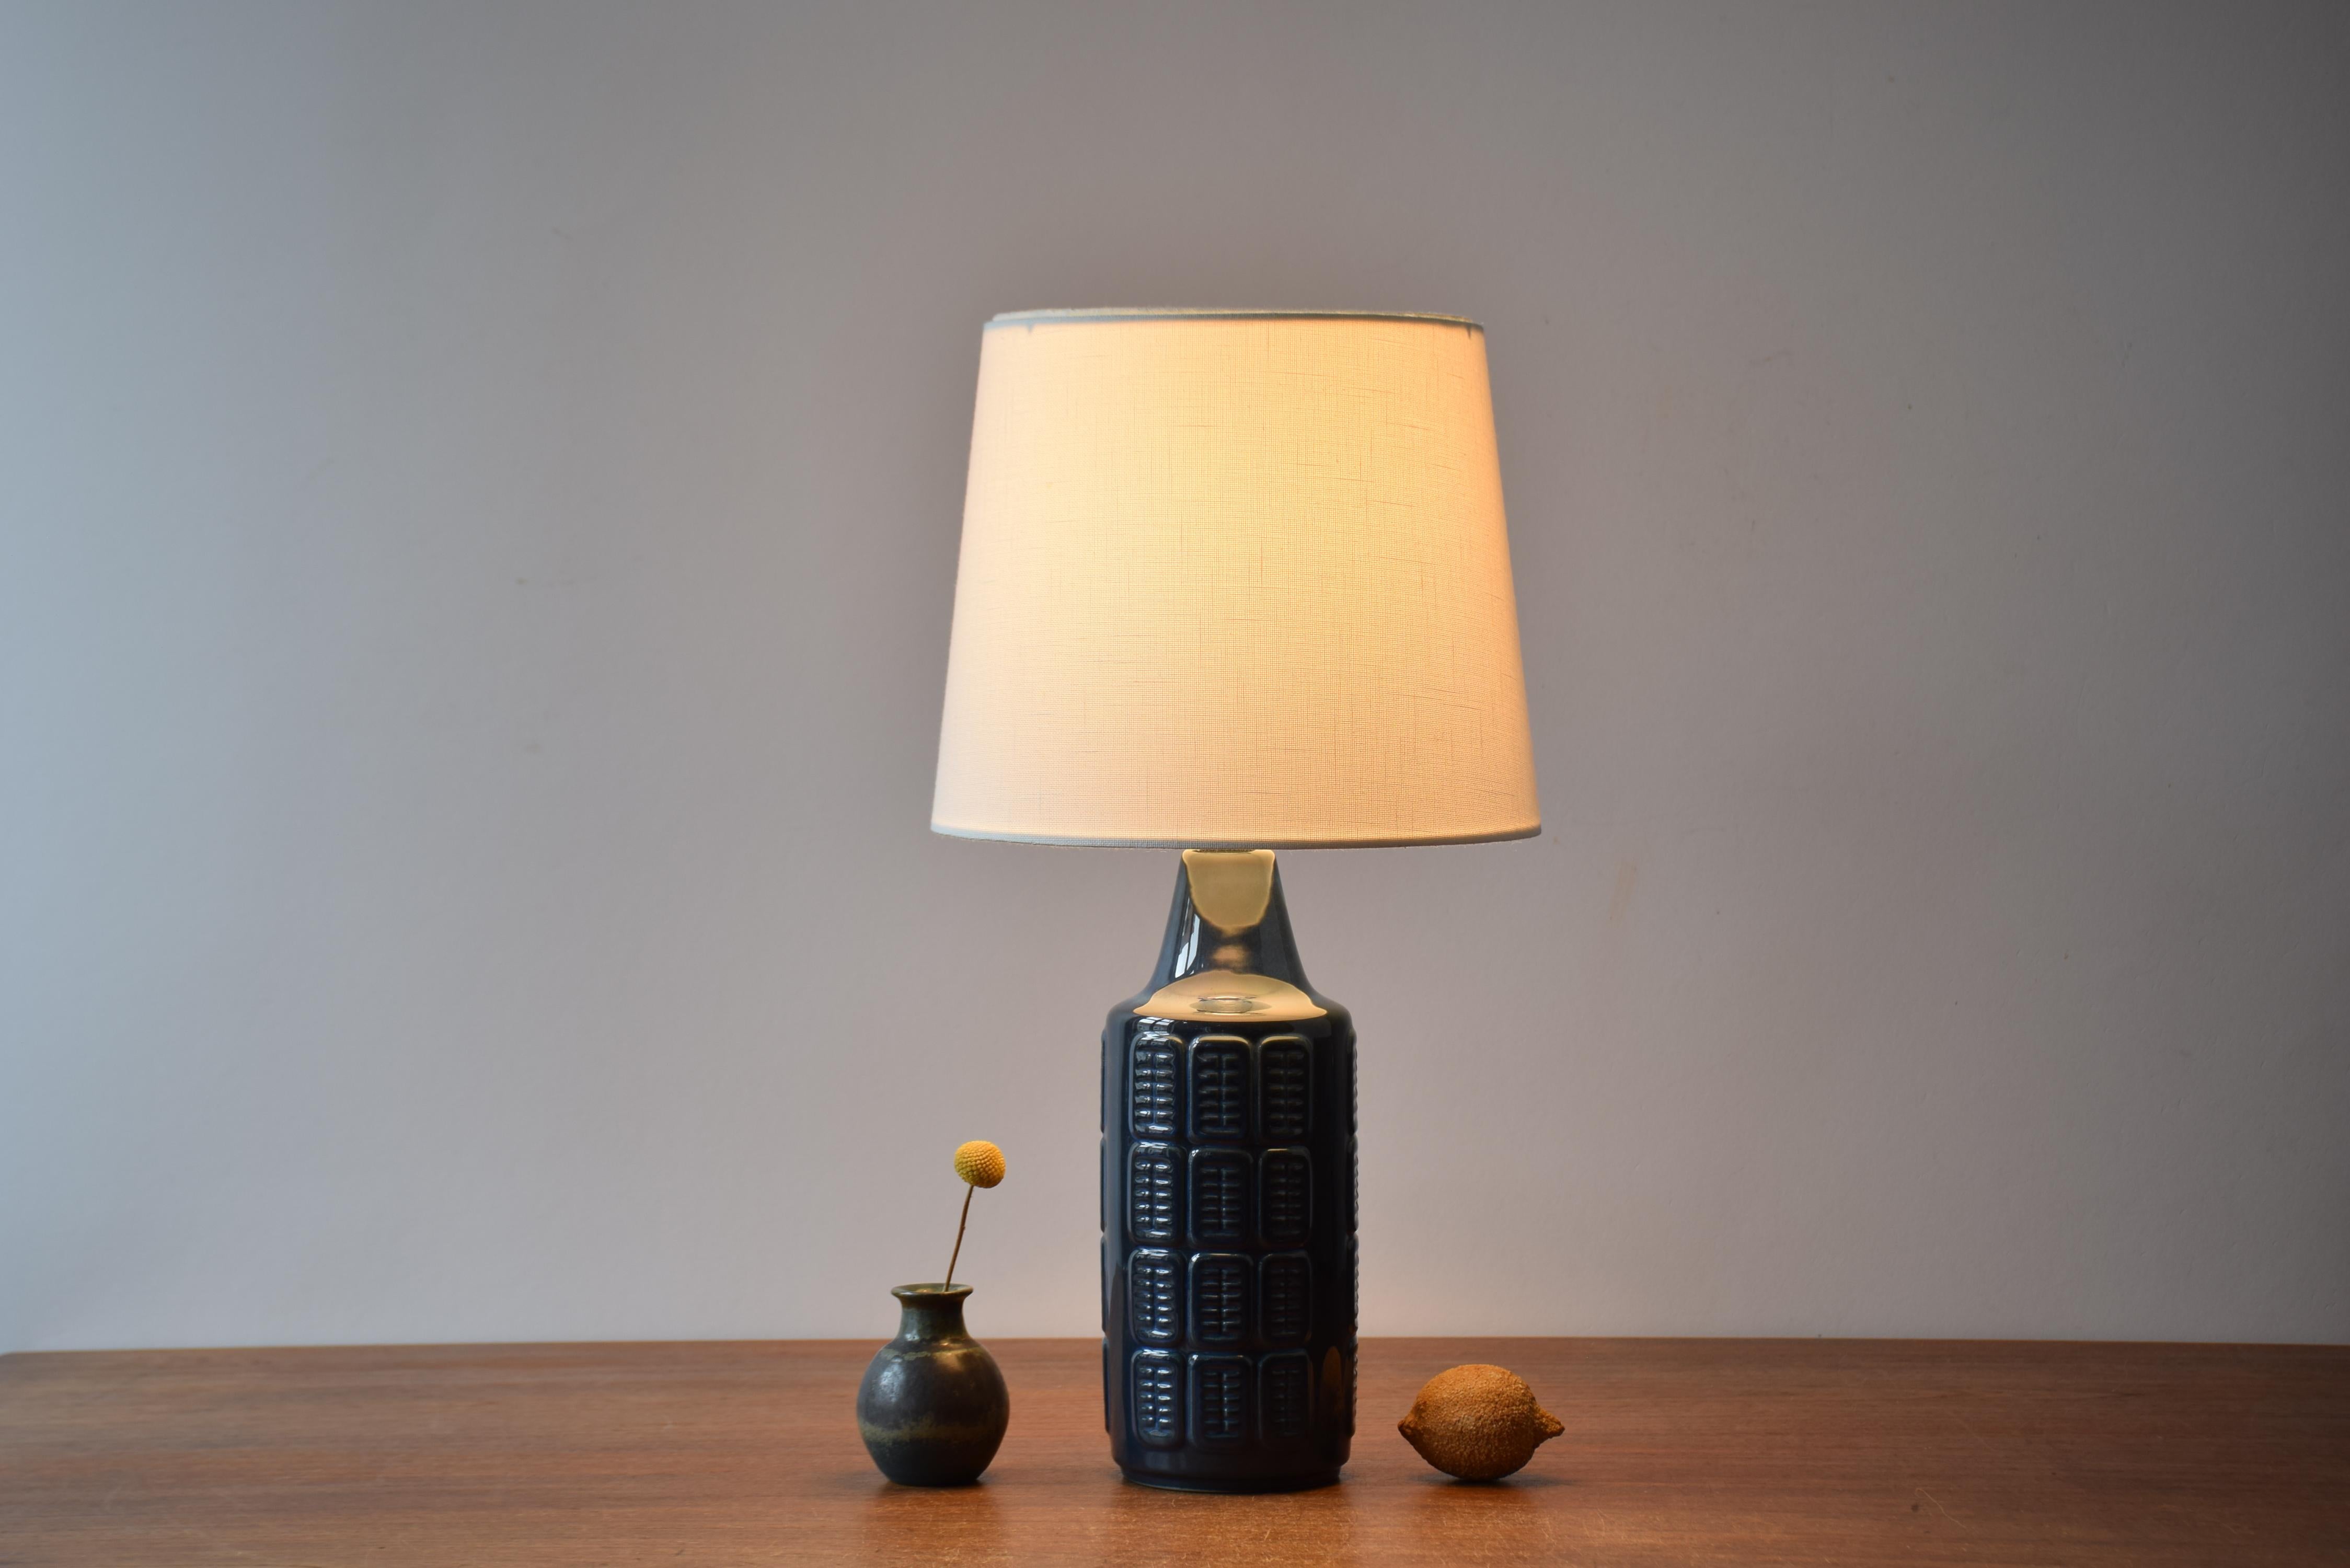 Table lamp by Einar Johansen for Søholm Stentøj, Denmark, circa 1960s.
The lamp has shiny blue glaze over an embossed repeated graphic decor. 

Included is a new lamp shade designed and made in Denmark. It is made of woven fabric with some texture